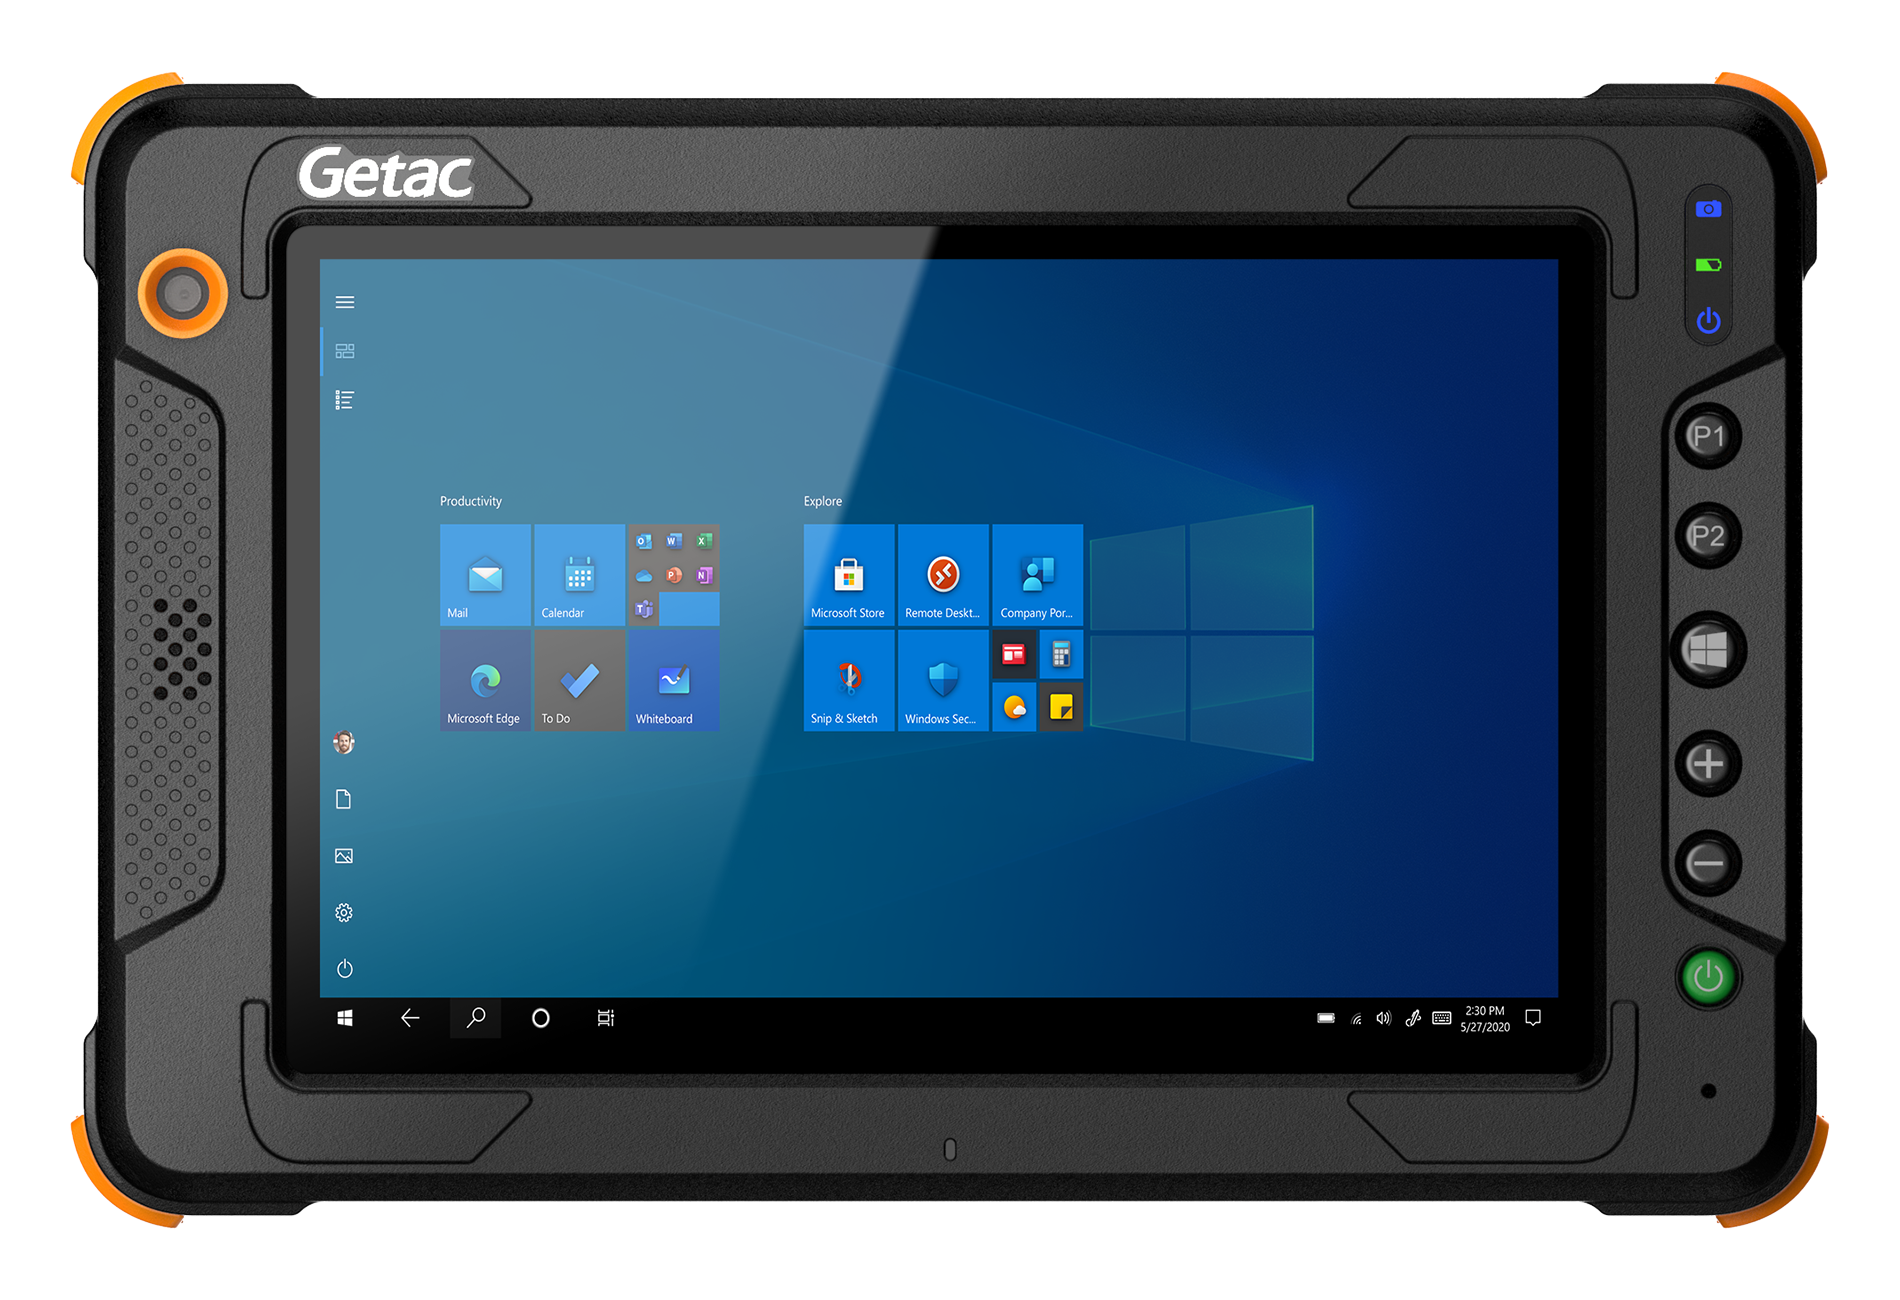 Getac EX80 ATEX IECEx Rugged Tablet on white background